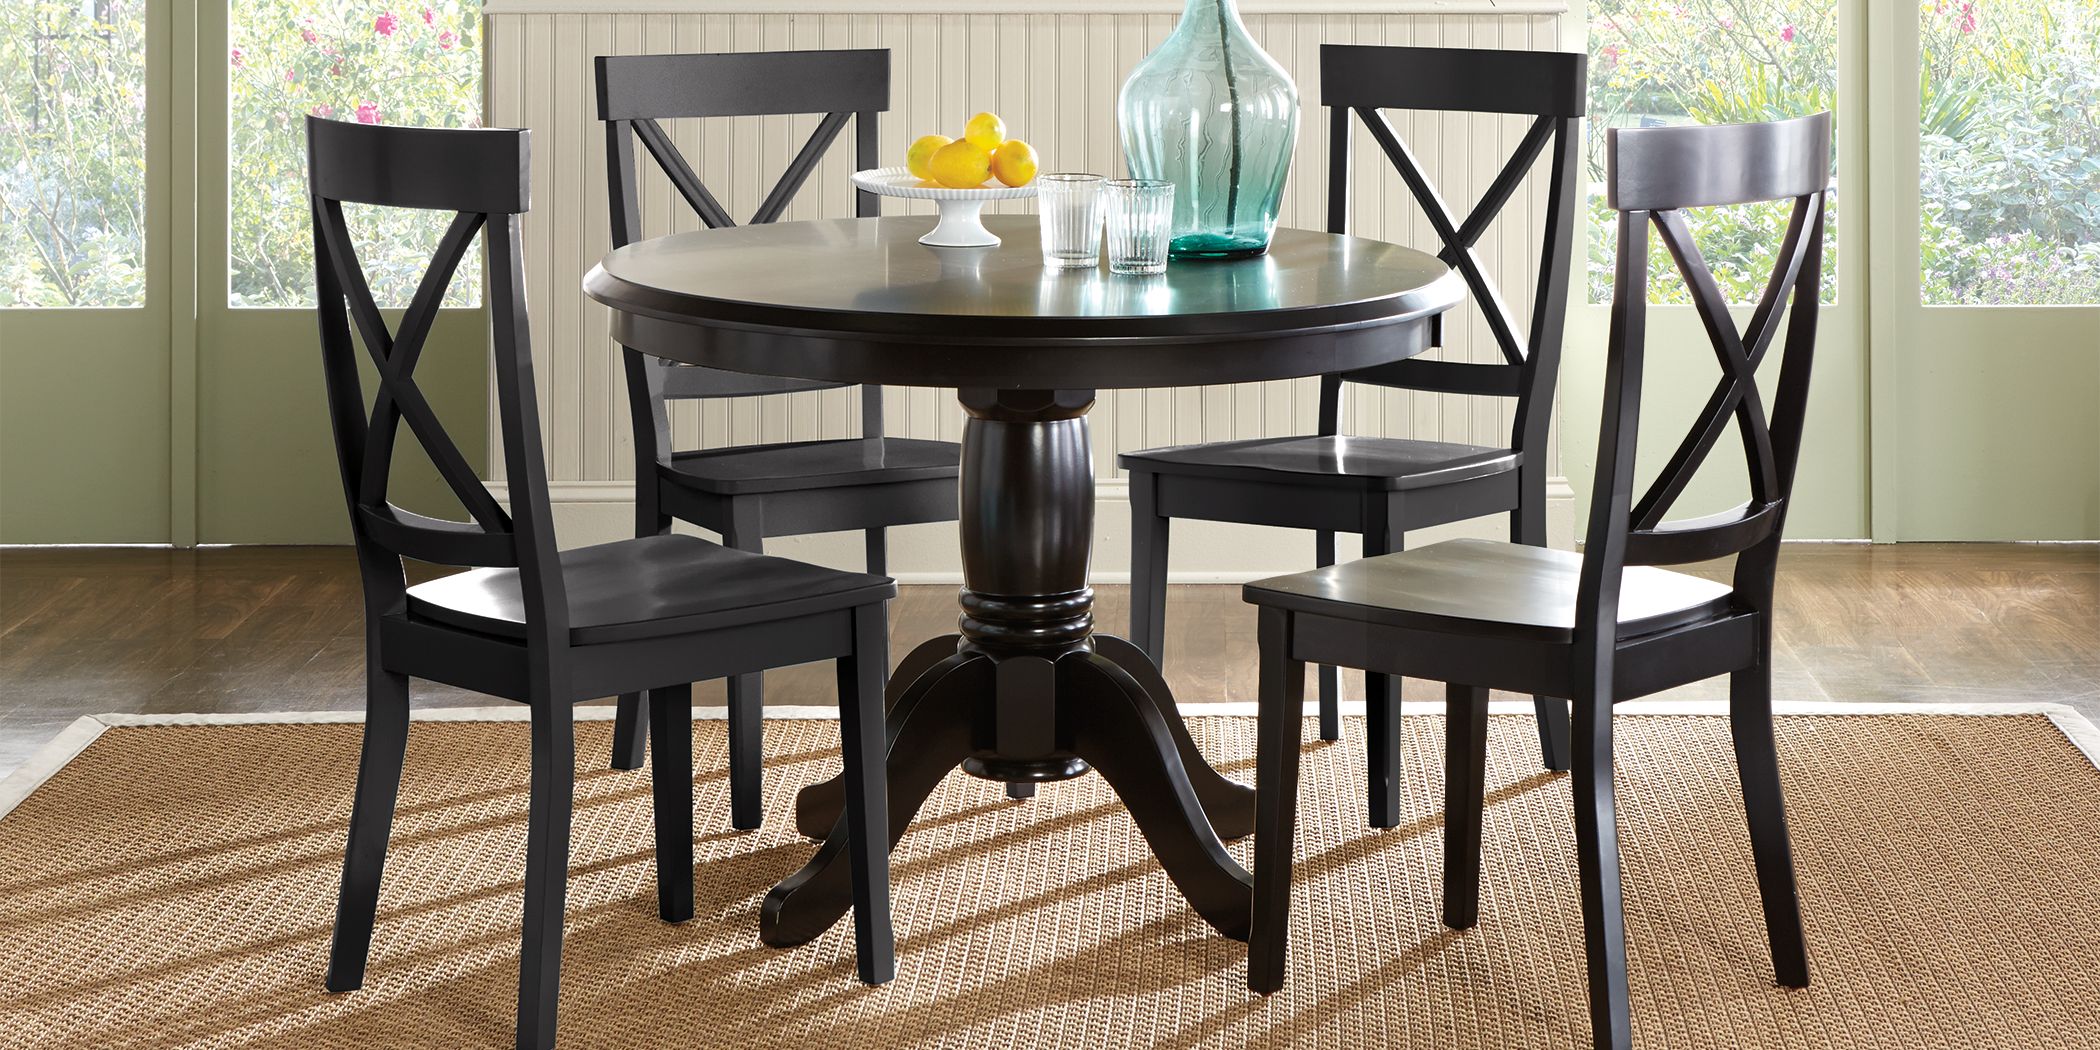 Dining Room Furniture Rooms, Black High Top Kitchen Table And Chairs